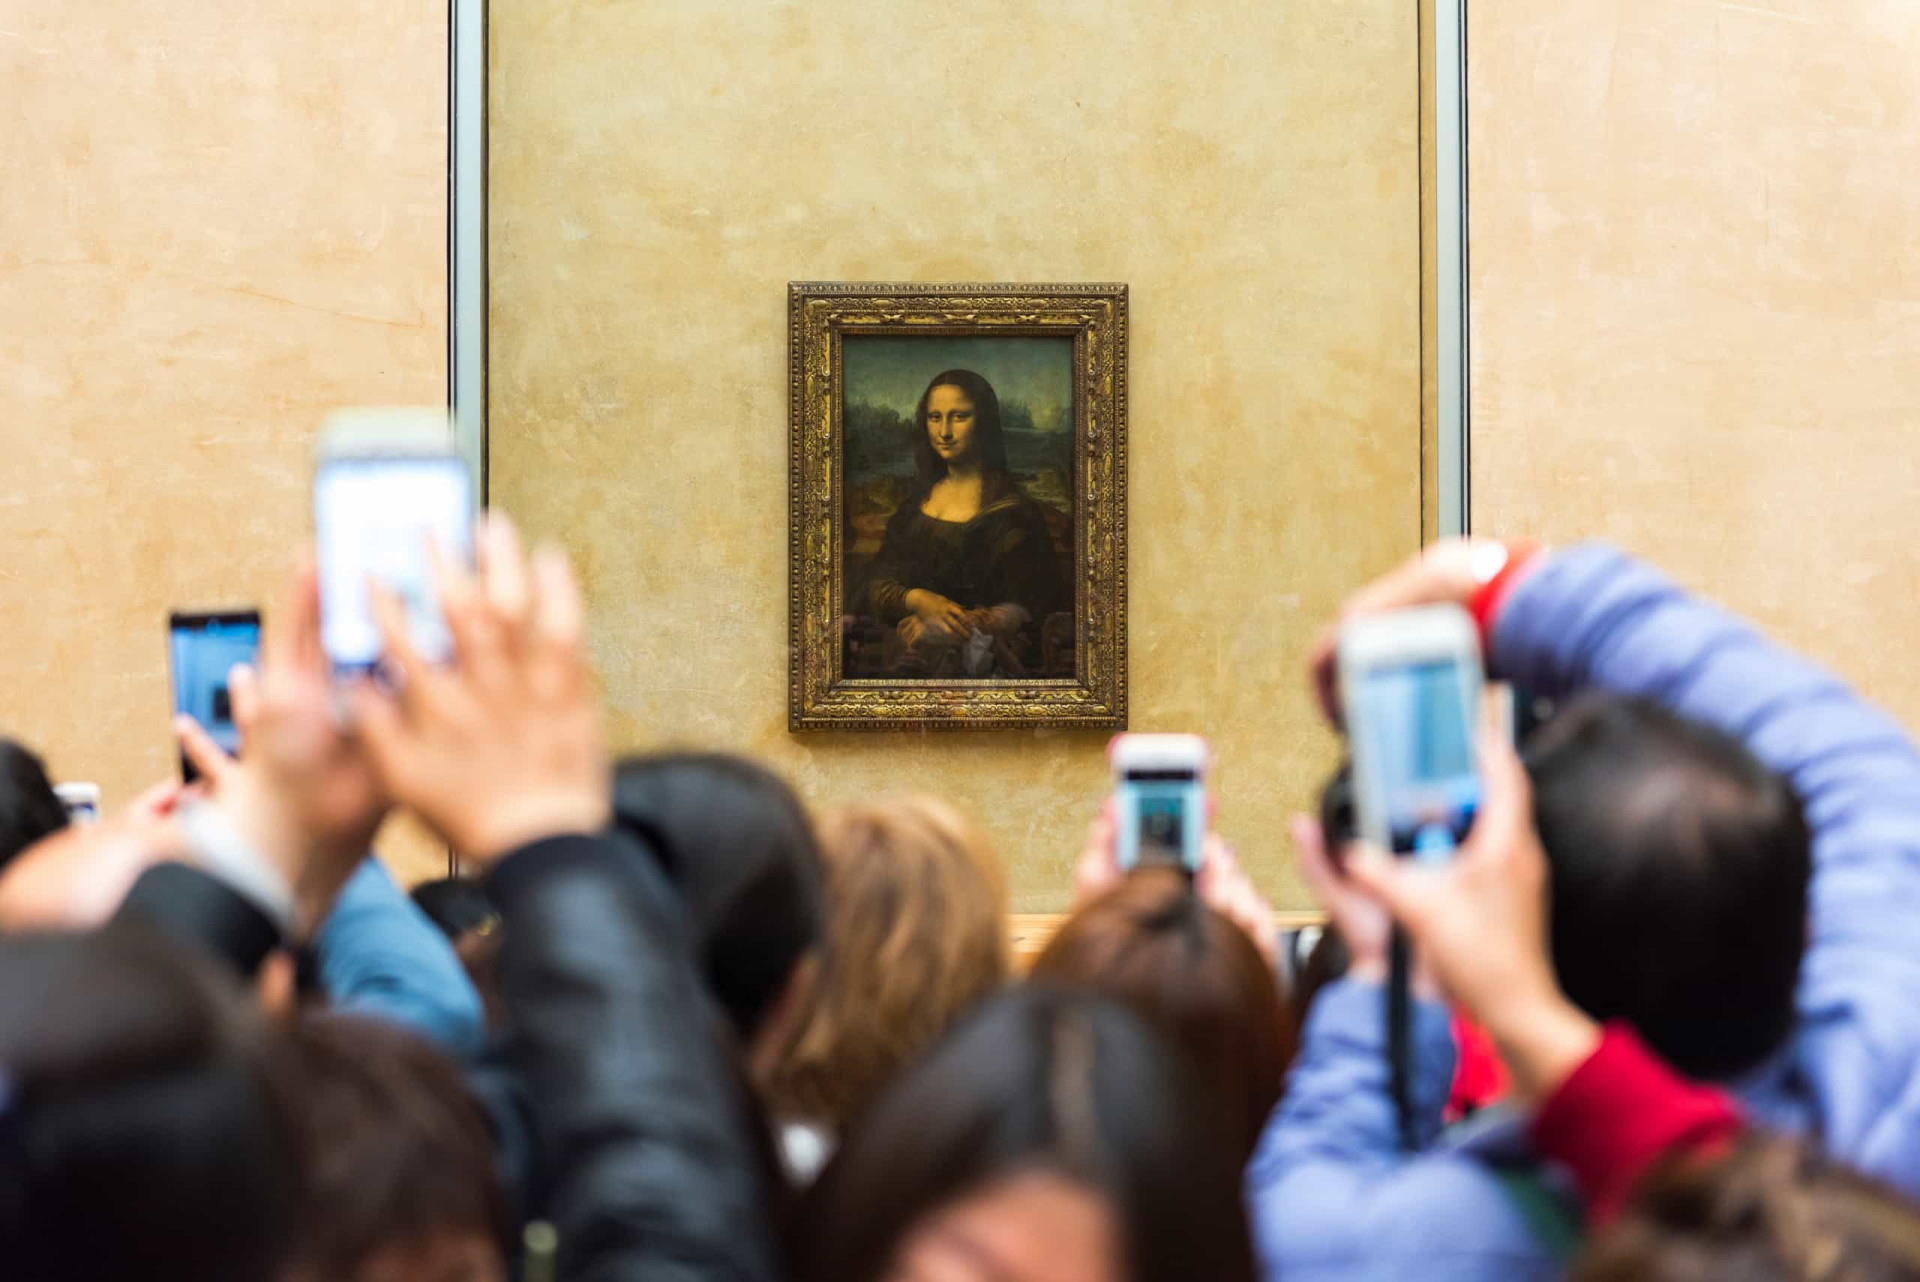 <p>The walkout in May 2019 of <a href="https://www.starsinsider.com/travel/409528/stars-and-art-at-the-louvre" rel="noopener">Louvre</a> security staff in protest over the museum's handling of its burgeoning attendance figures highlighted conditions they described as "suffocating" and unacceptable. In 2019, the Louvre received 9.6 million visitors.</p> <p>See also: <a href="https://www.starsinsider.com/travel/489332/sustainable-travel-destinations-around-the-world">Sustainable travel destinations around the world</a></p><p><a href="https://www.msn.com/en-my/community/channel/vid-7xx8mnucu55yw63we9va2gwr7uihbxwc68fxqp25x6tg4ftibpra?cvid=94631541bc0f4f89bfd59158d696ad7e">Follow us and access great exclusive content every day</a></p>